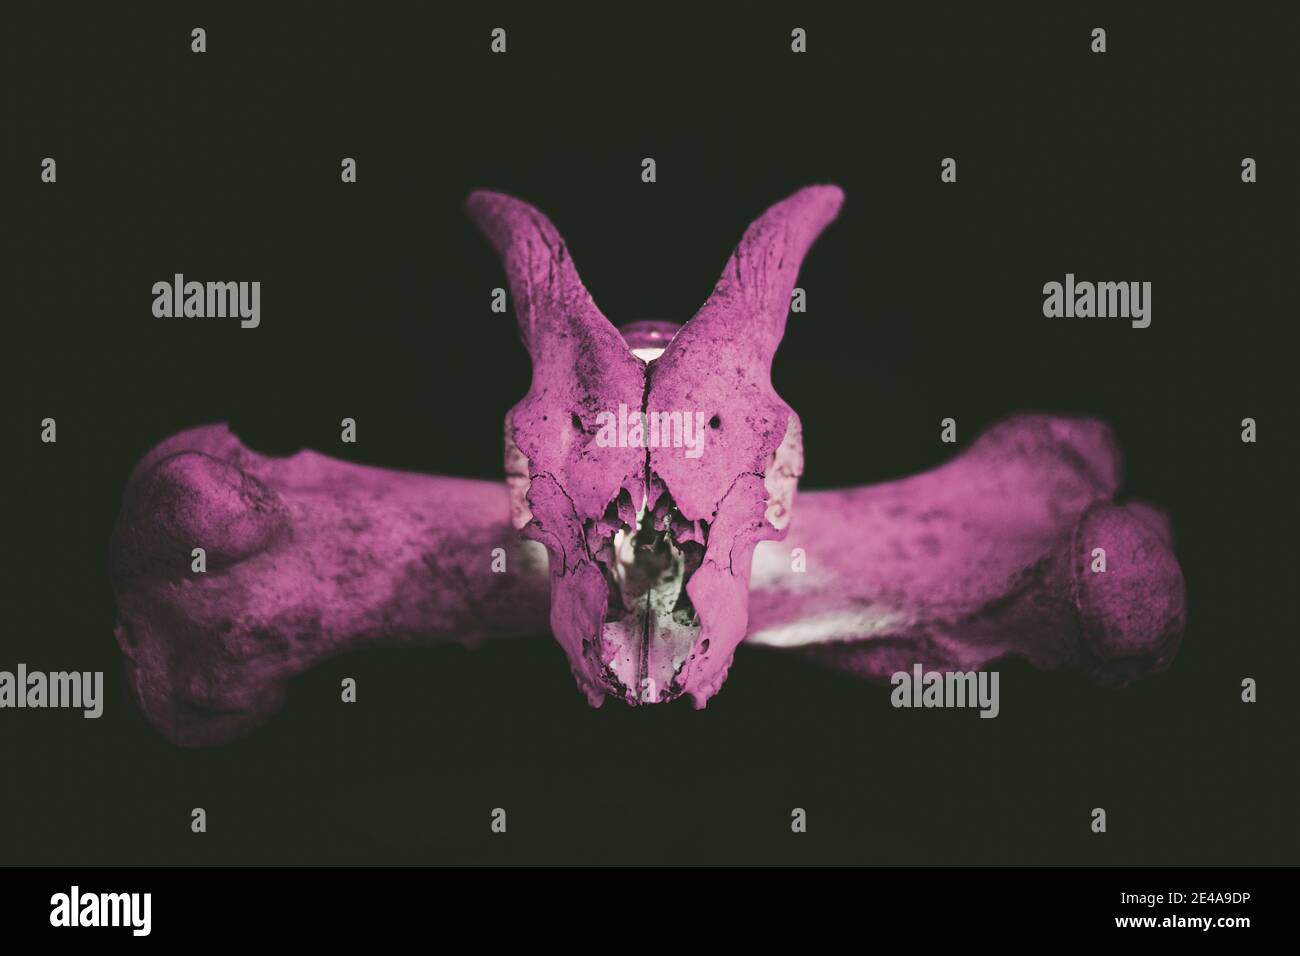 Goat skull with horns on the bear bone with purple light in the dark background. Stock Photo